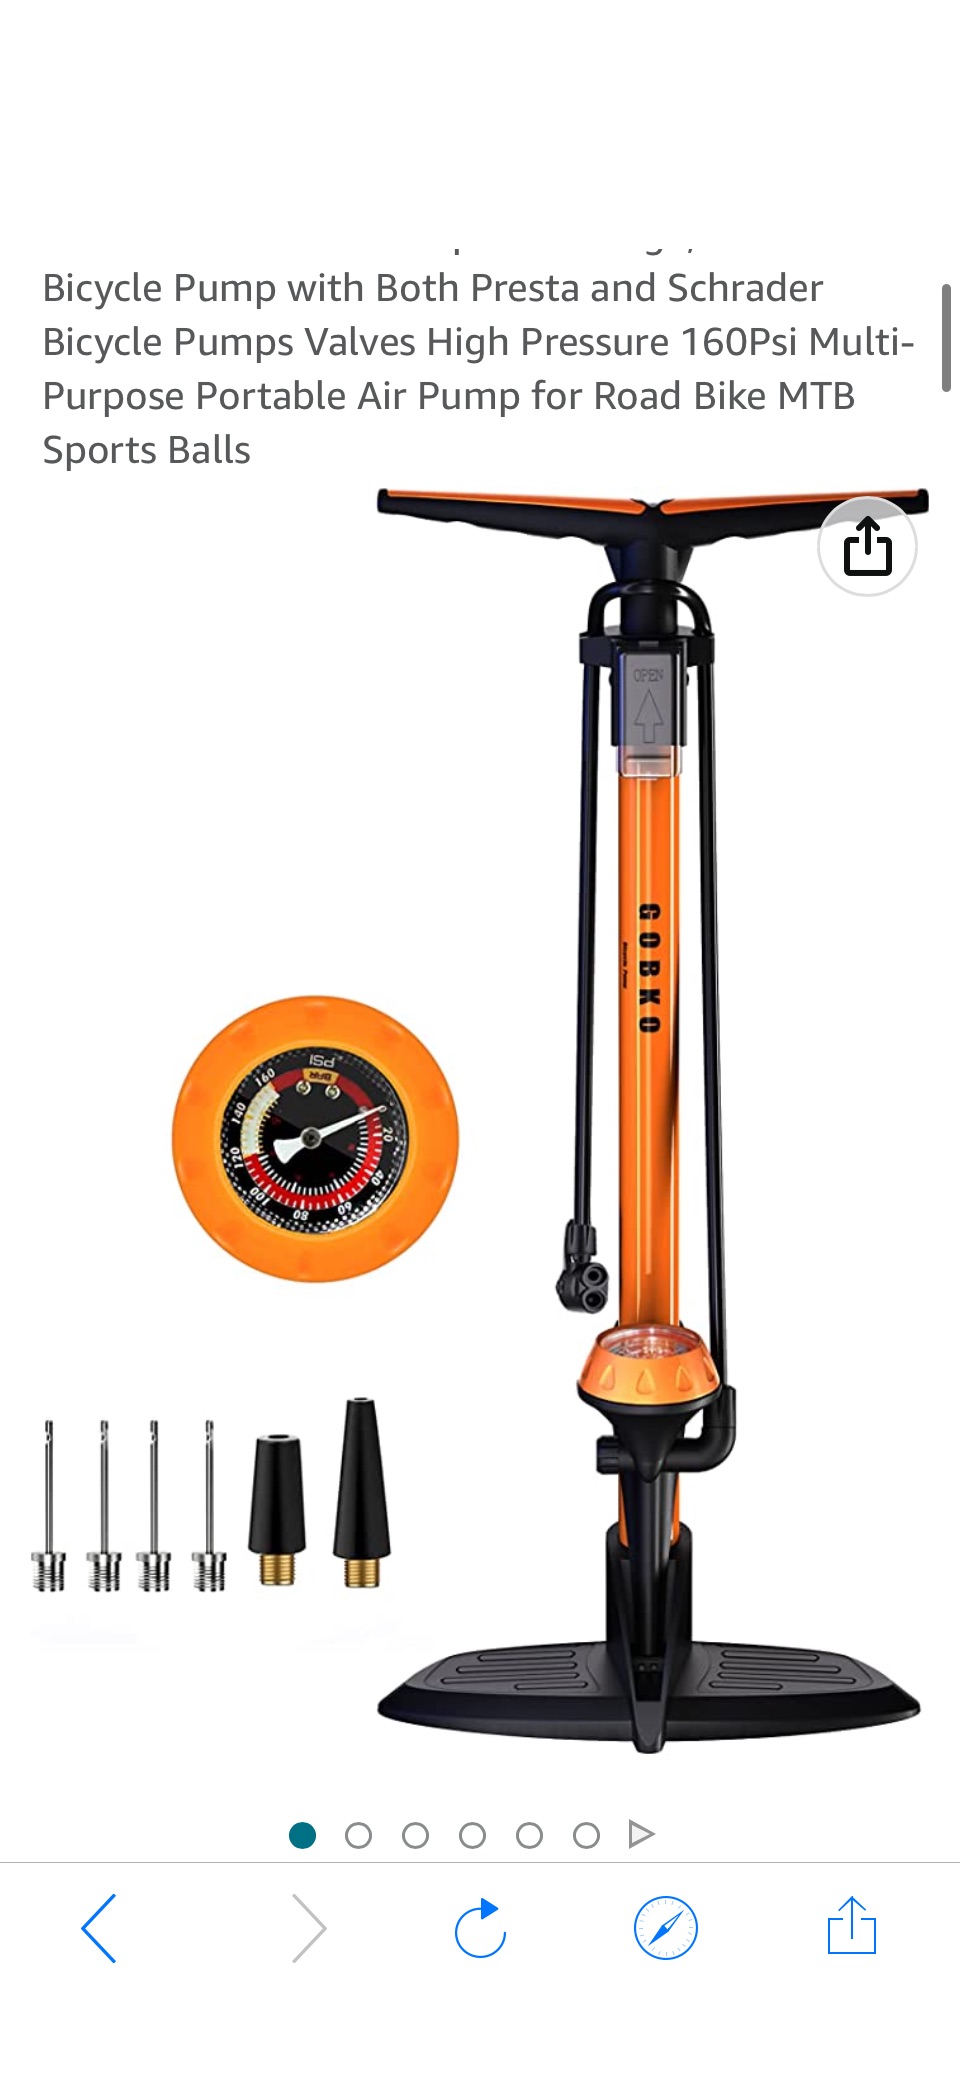 Amazon.com : GOBKO Bike Floor Pump with Gauge,Floor Bicycle Pump with Both Presta and Schrader Bicycle Pumps Valves High Pressure 160Psi Multi-Purpose Air Pump for Road Bike MTB Sports Balls : Sports & Outdoors原价32.99